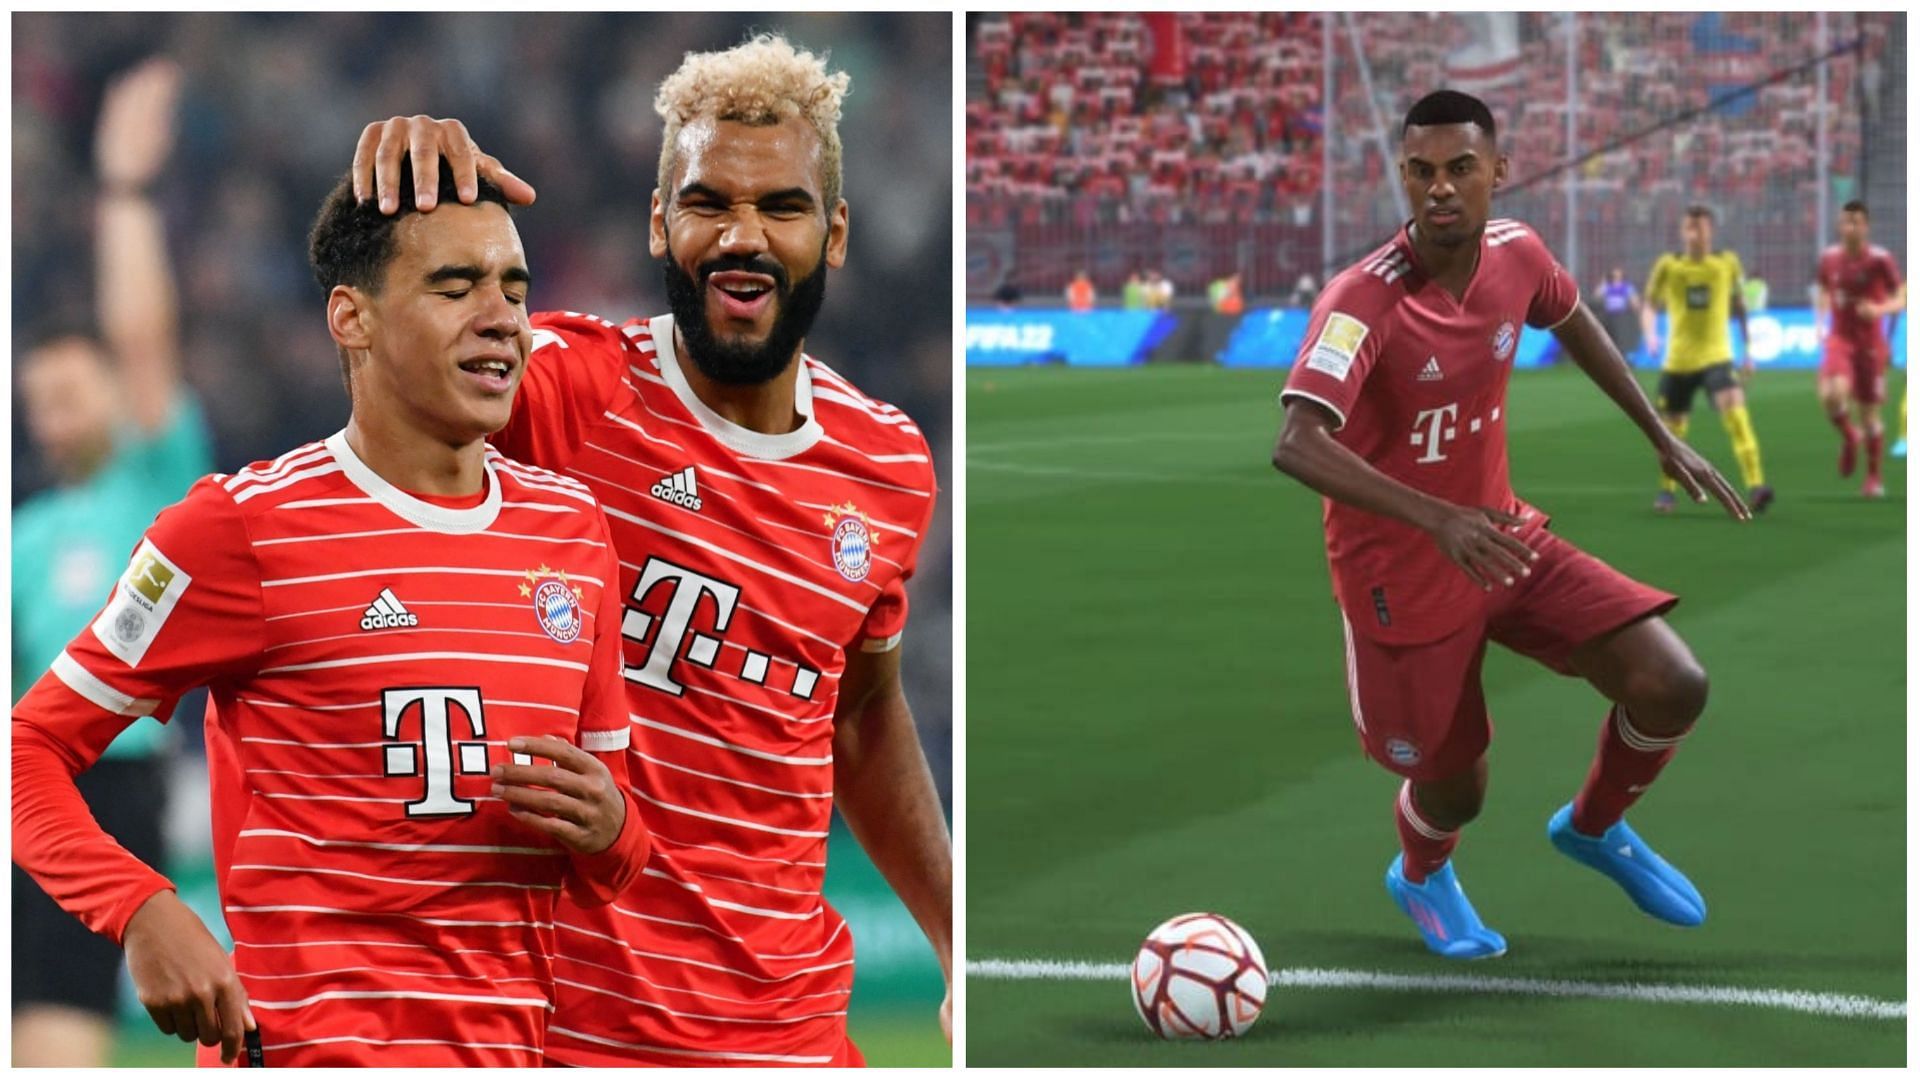 Bayern Munich are the kings of German football (Images via Getty Images and EA Sports)